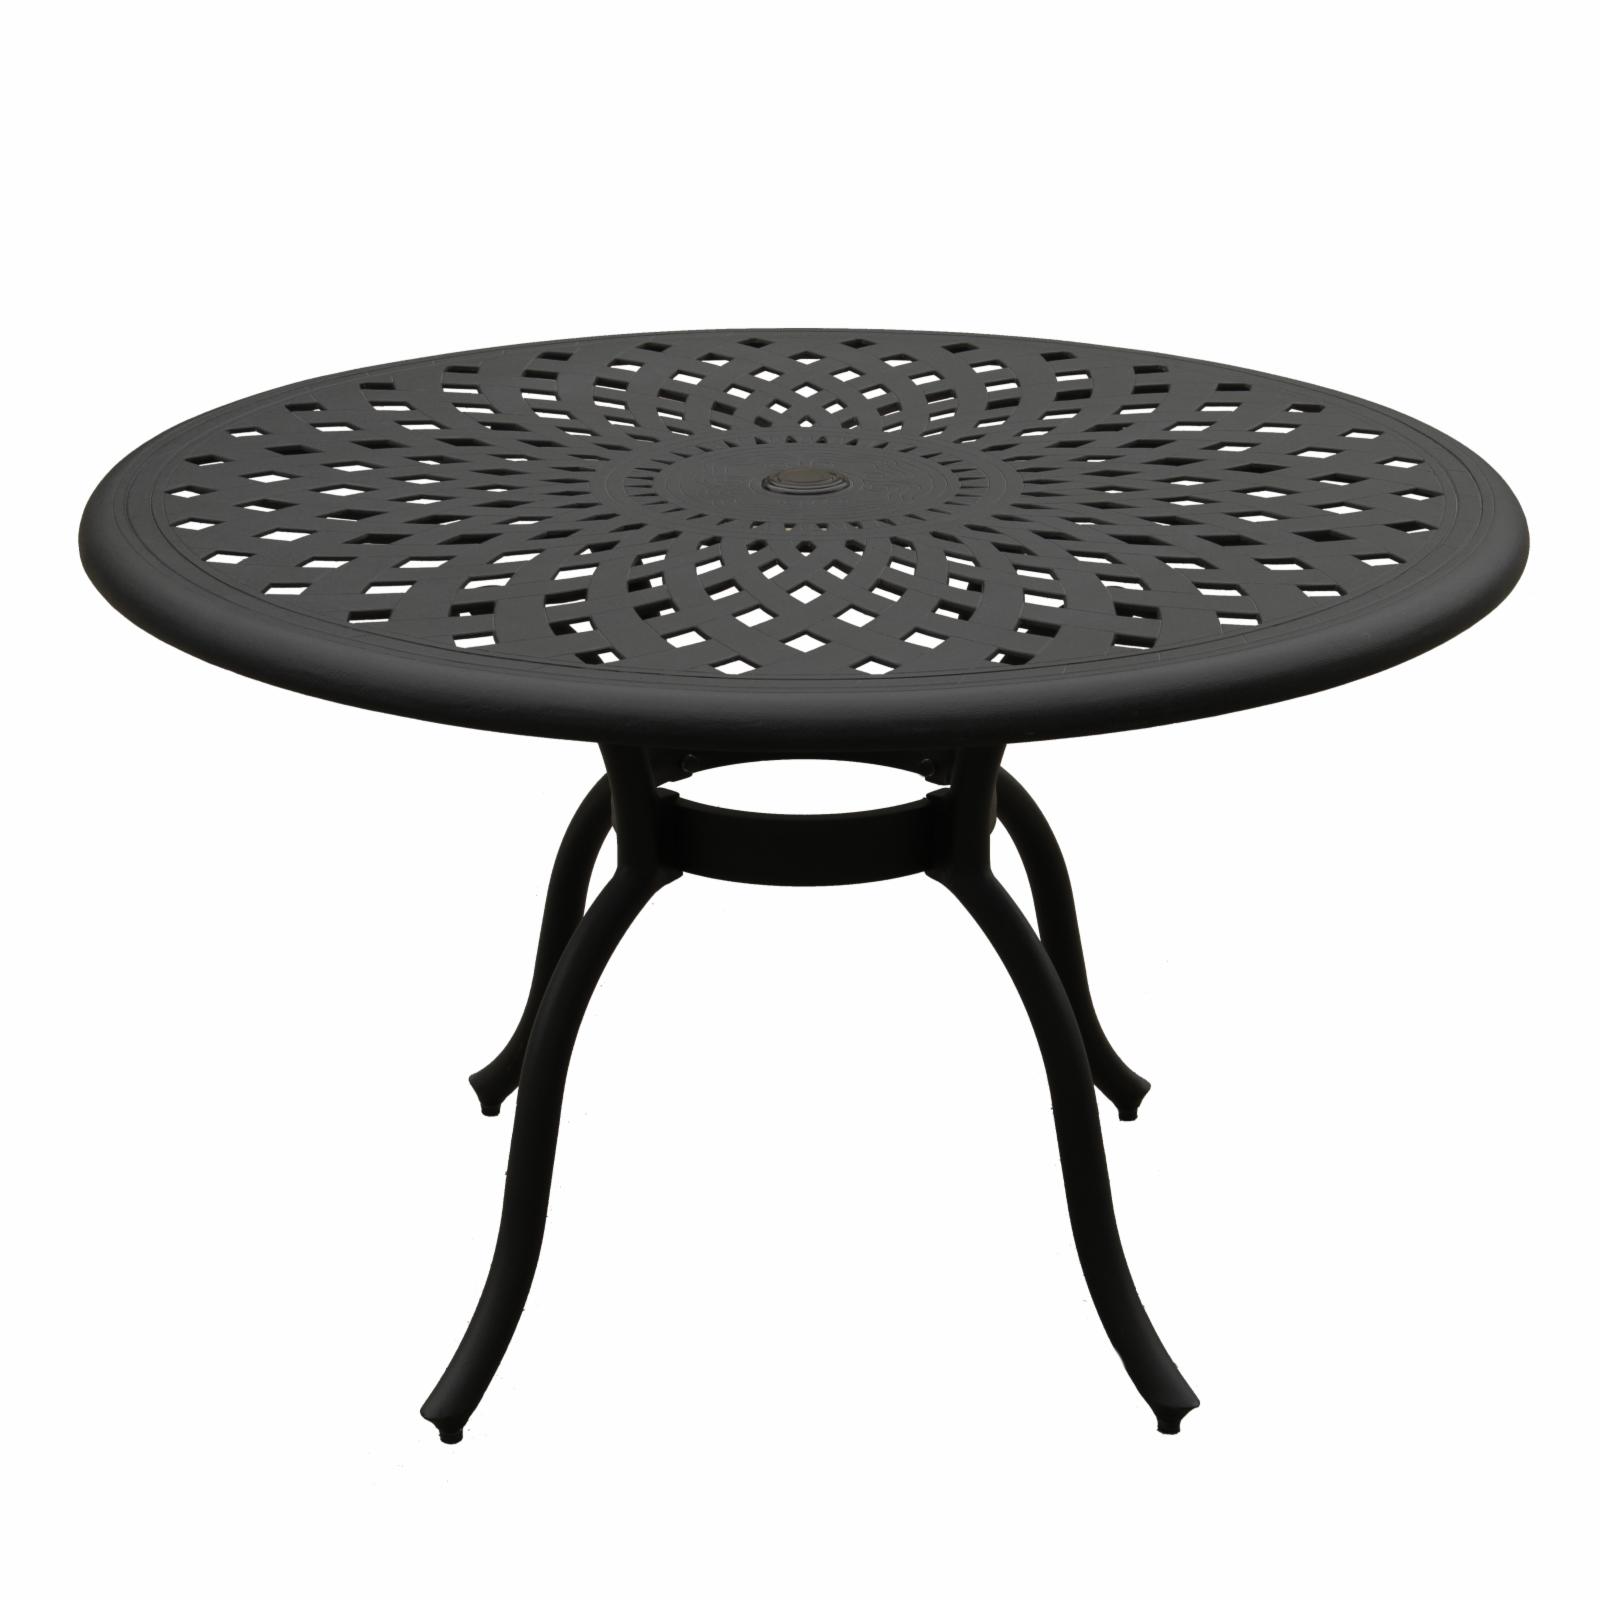 Oakland Living Modern Outdoor Mesh Aluminum 48 in. Round Patio Dining Table - Black - image 1 of 4